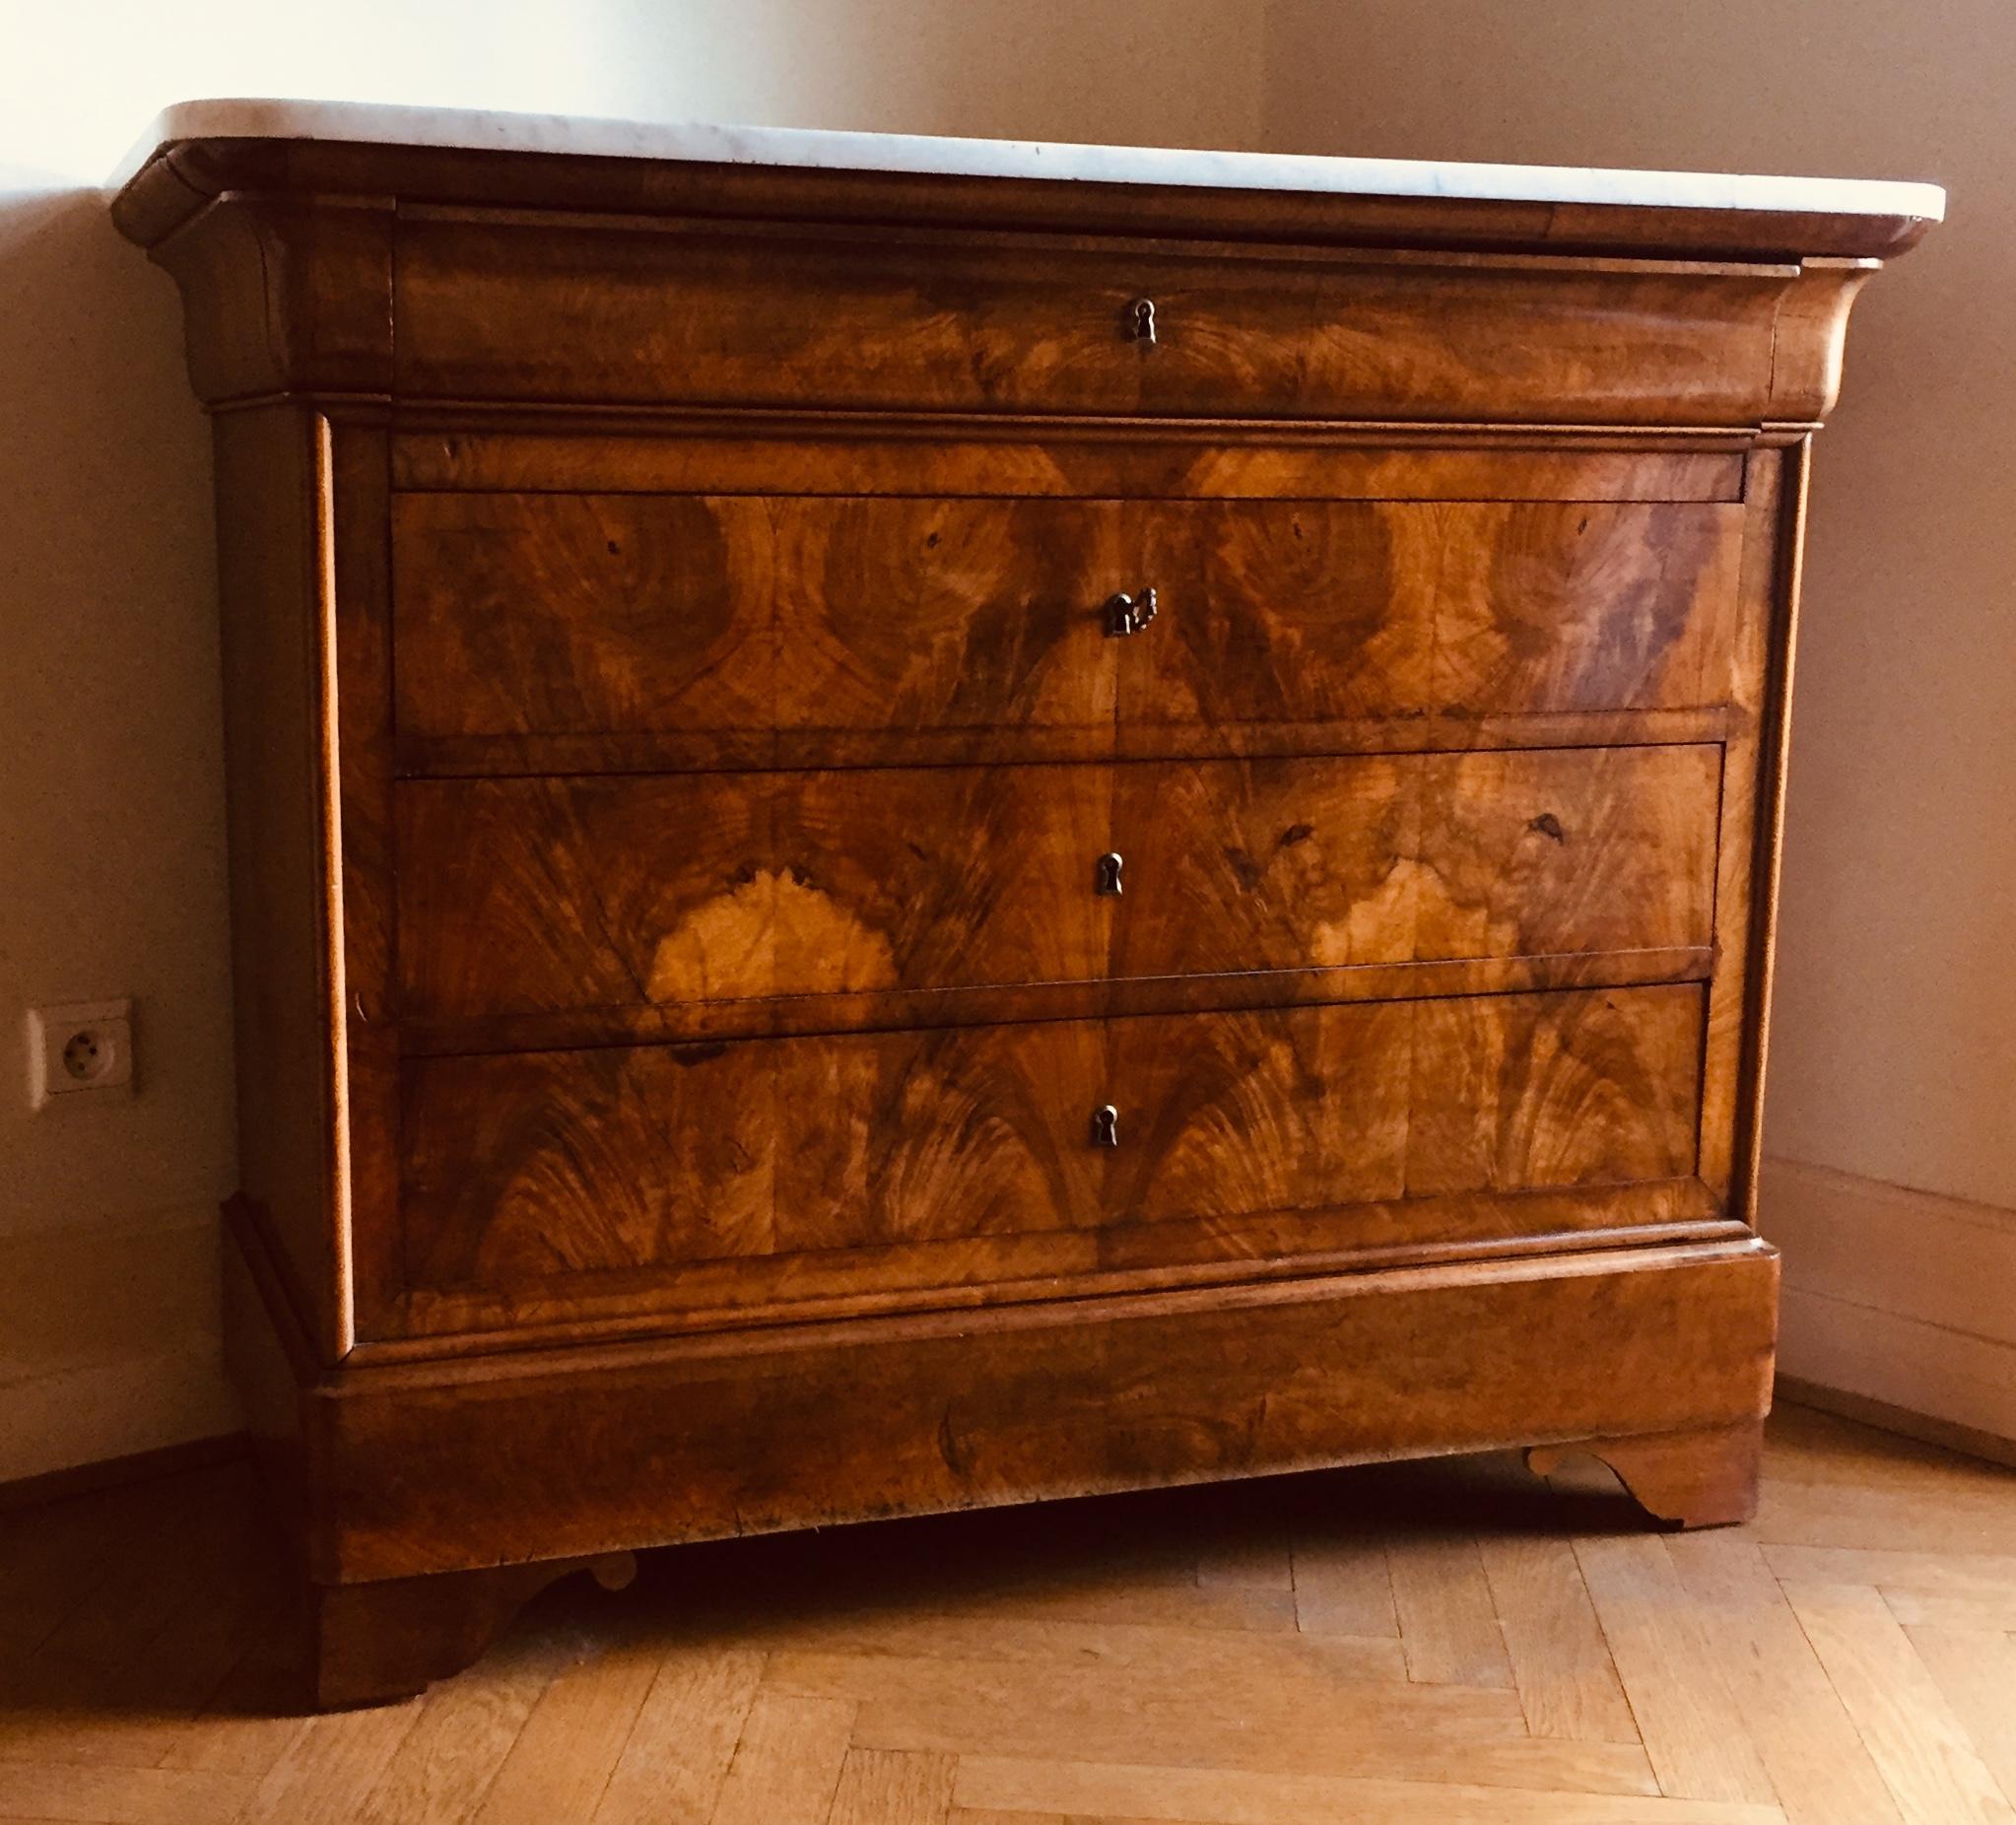 Exquisite chest of Drawers (4 drawers plus the upper part as writing desk) in the writing desk space are 6 small drawers plus 2 secret panels on both each side. The dark blue leather flat part of the desk is from origine.
Nothing has been